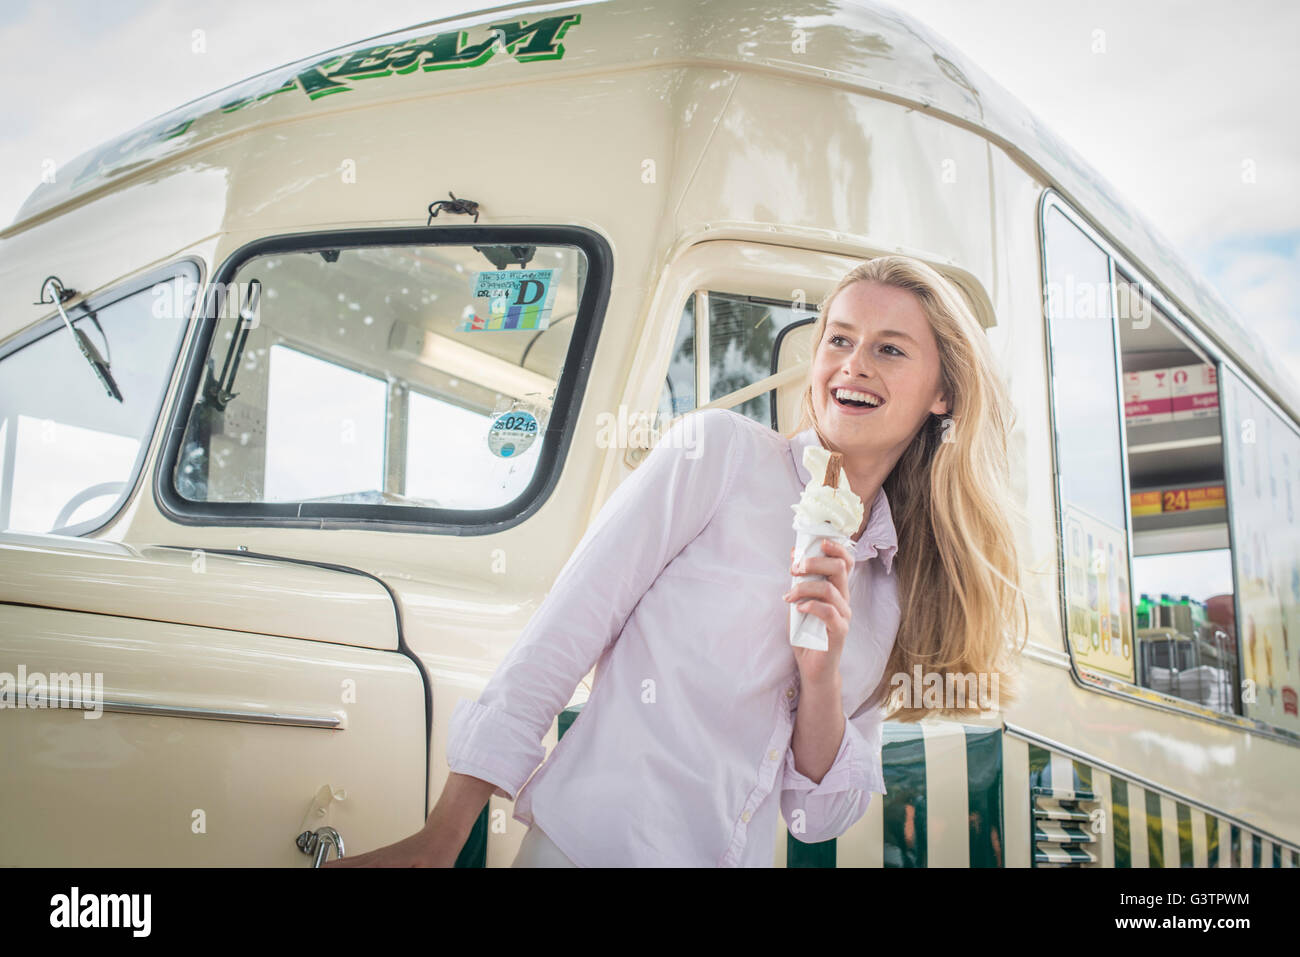 A girl standing in front of a traditional ice cream van on the South Bank in London. Stock Photo